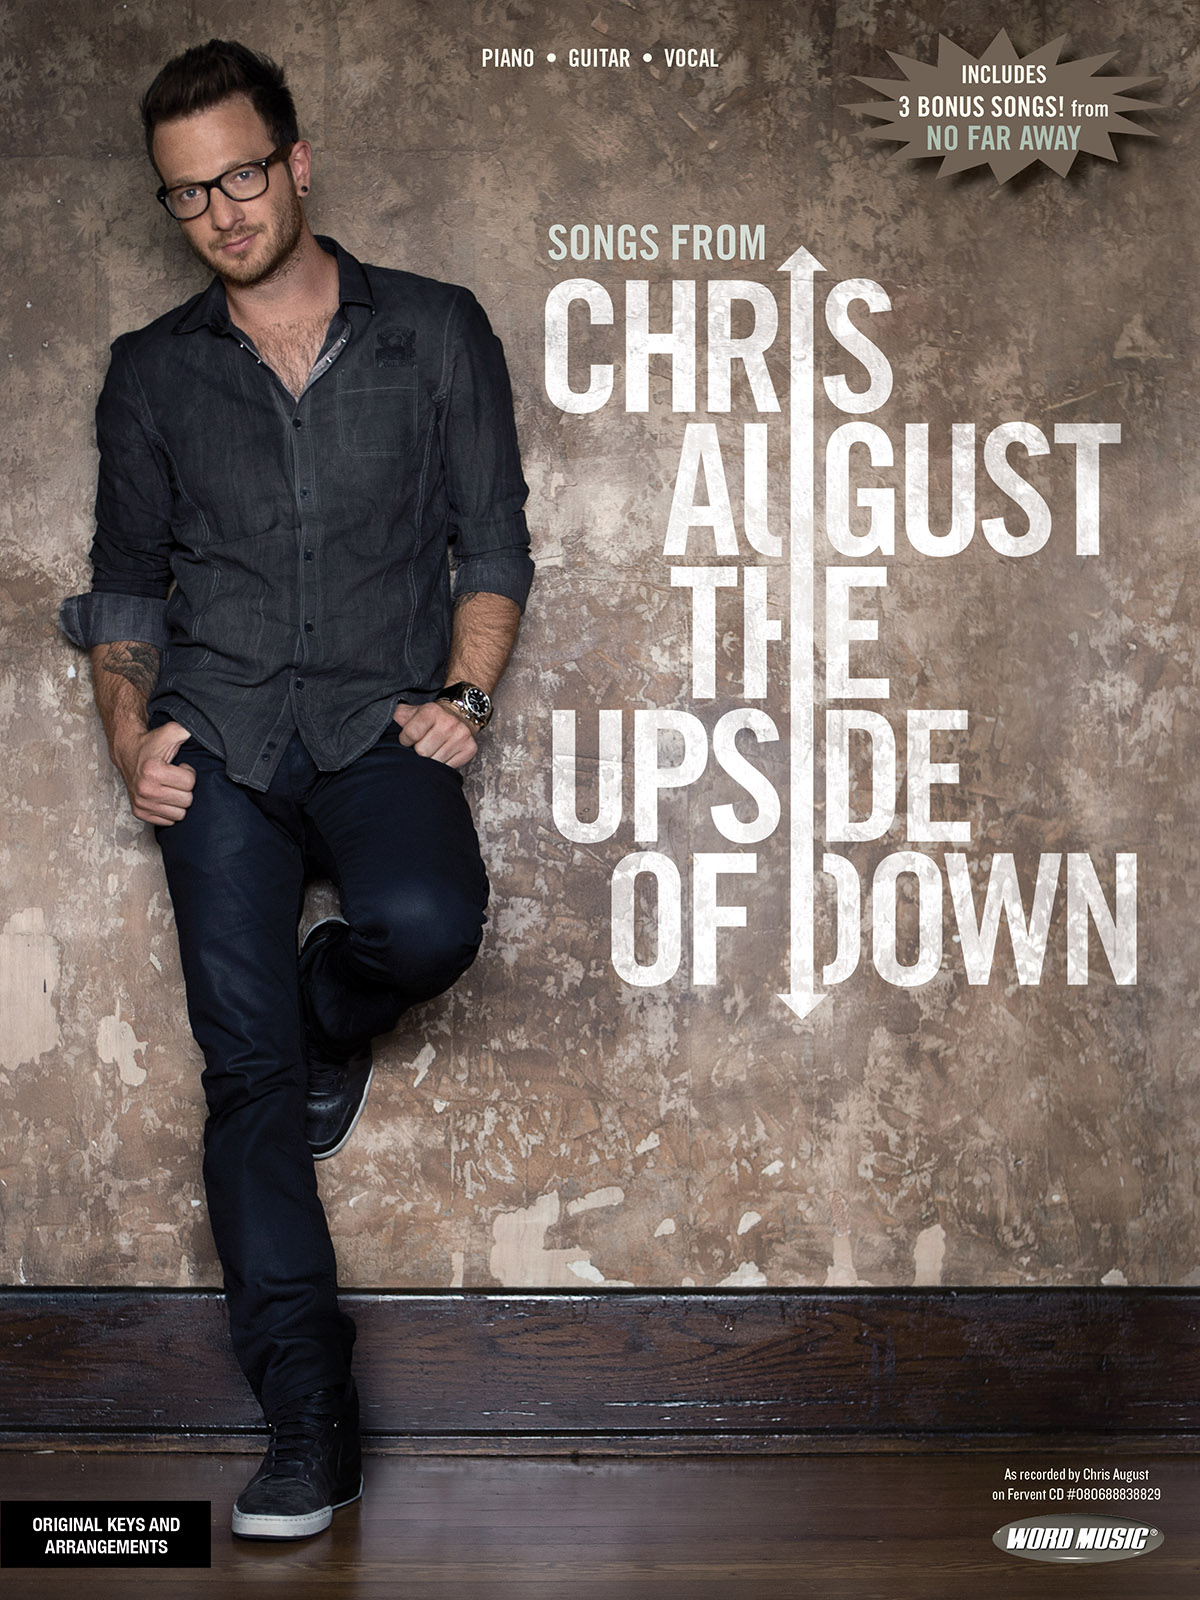 Songs From Chris August - The Upside Of Down